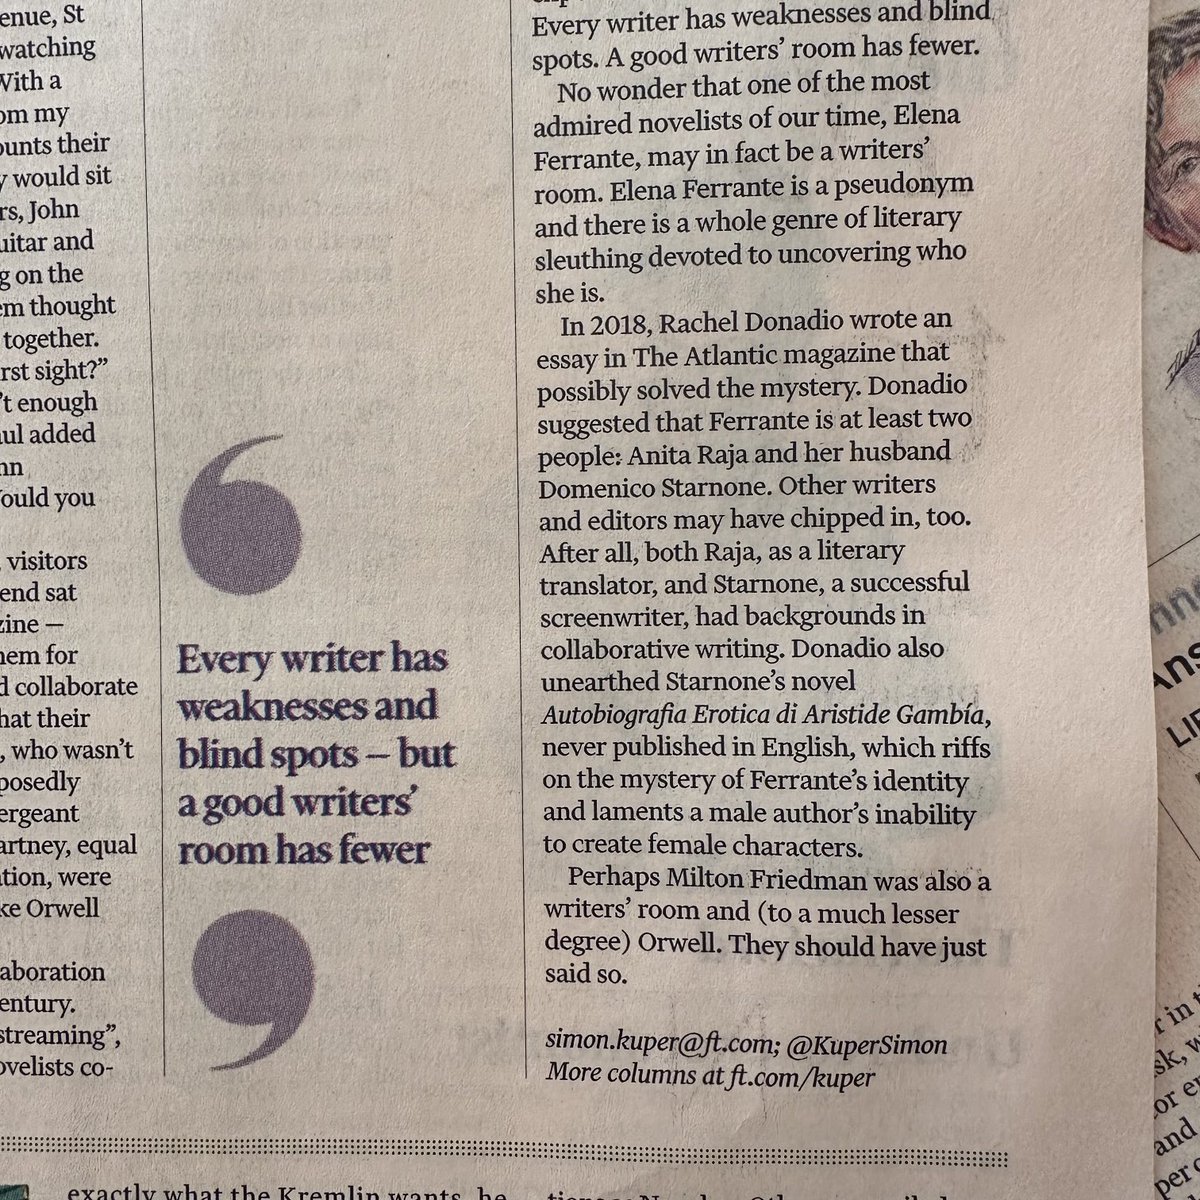 🙏 ⁦Thanks @KuperSimon⁩ for the @FT shoutout to my 2018 ⁦@TheAtlantic⁩ essay on Elena Ferrante - or “Elena Ferrante” 😉 - in this smart piece on collective writing!